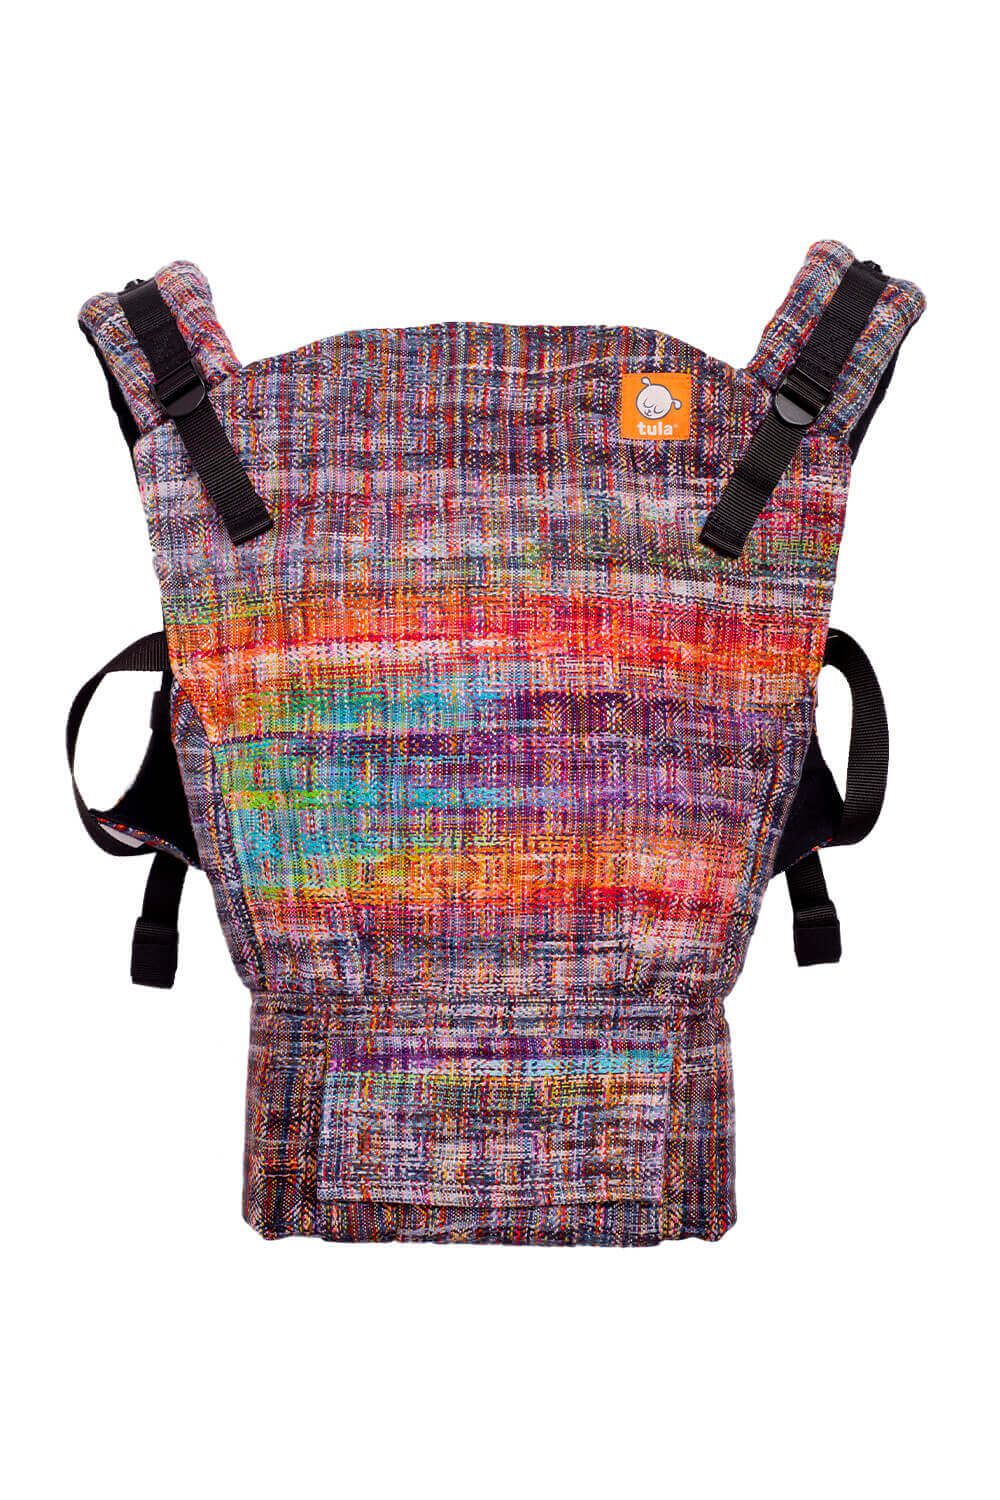 The Prism - Signature Handwoven Standard Baby Carrier